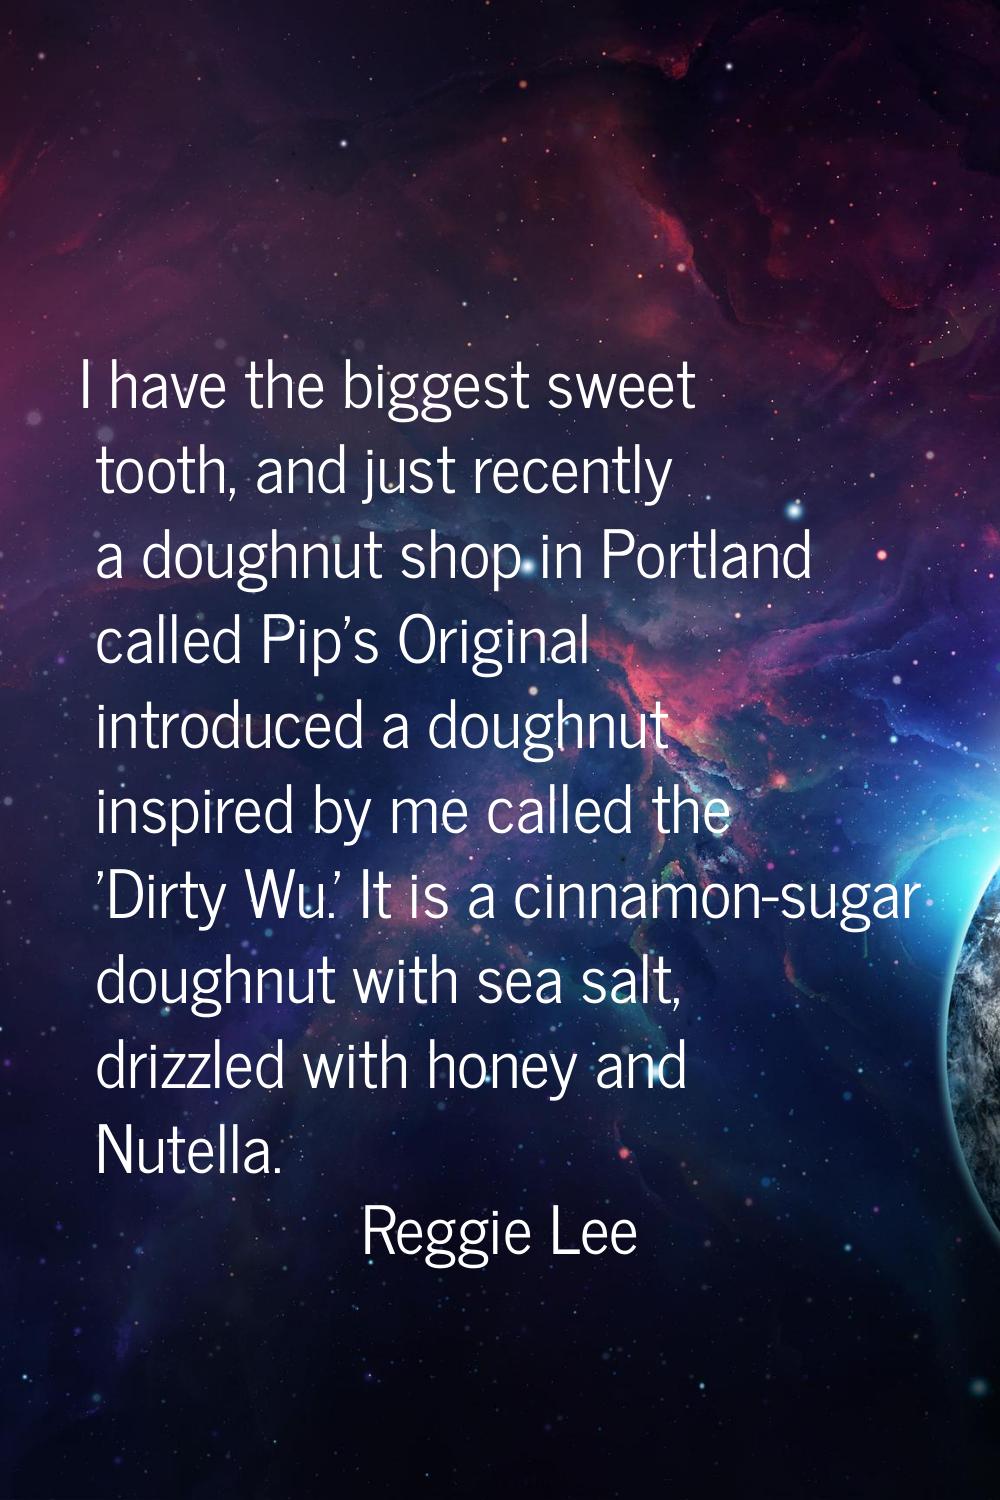 I have the biggest sweet tooth, and just recently a doughnut shop in Portland called Pip's Original